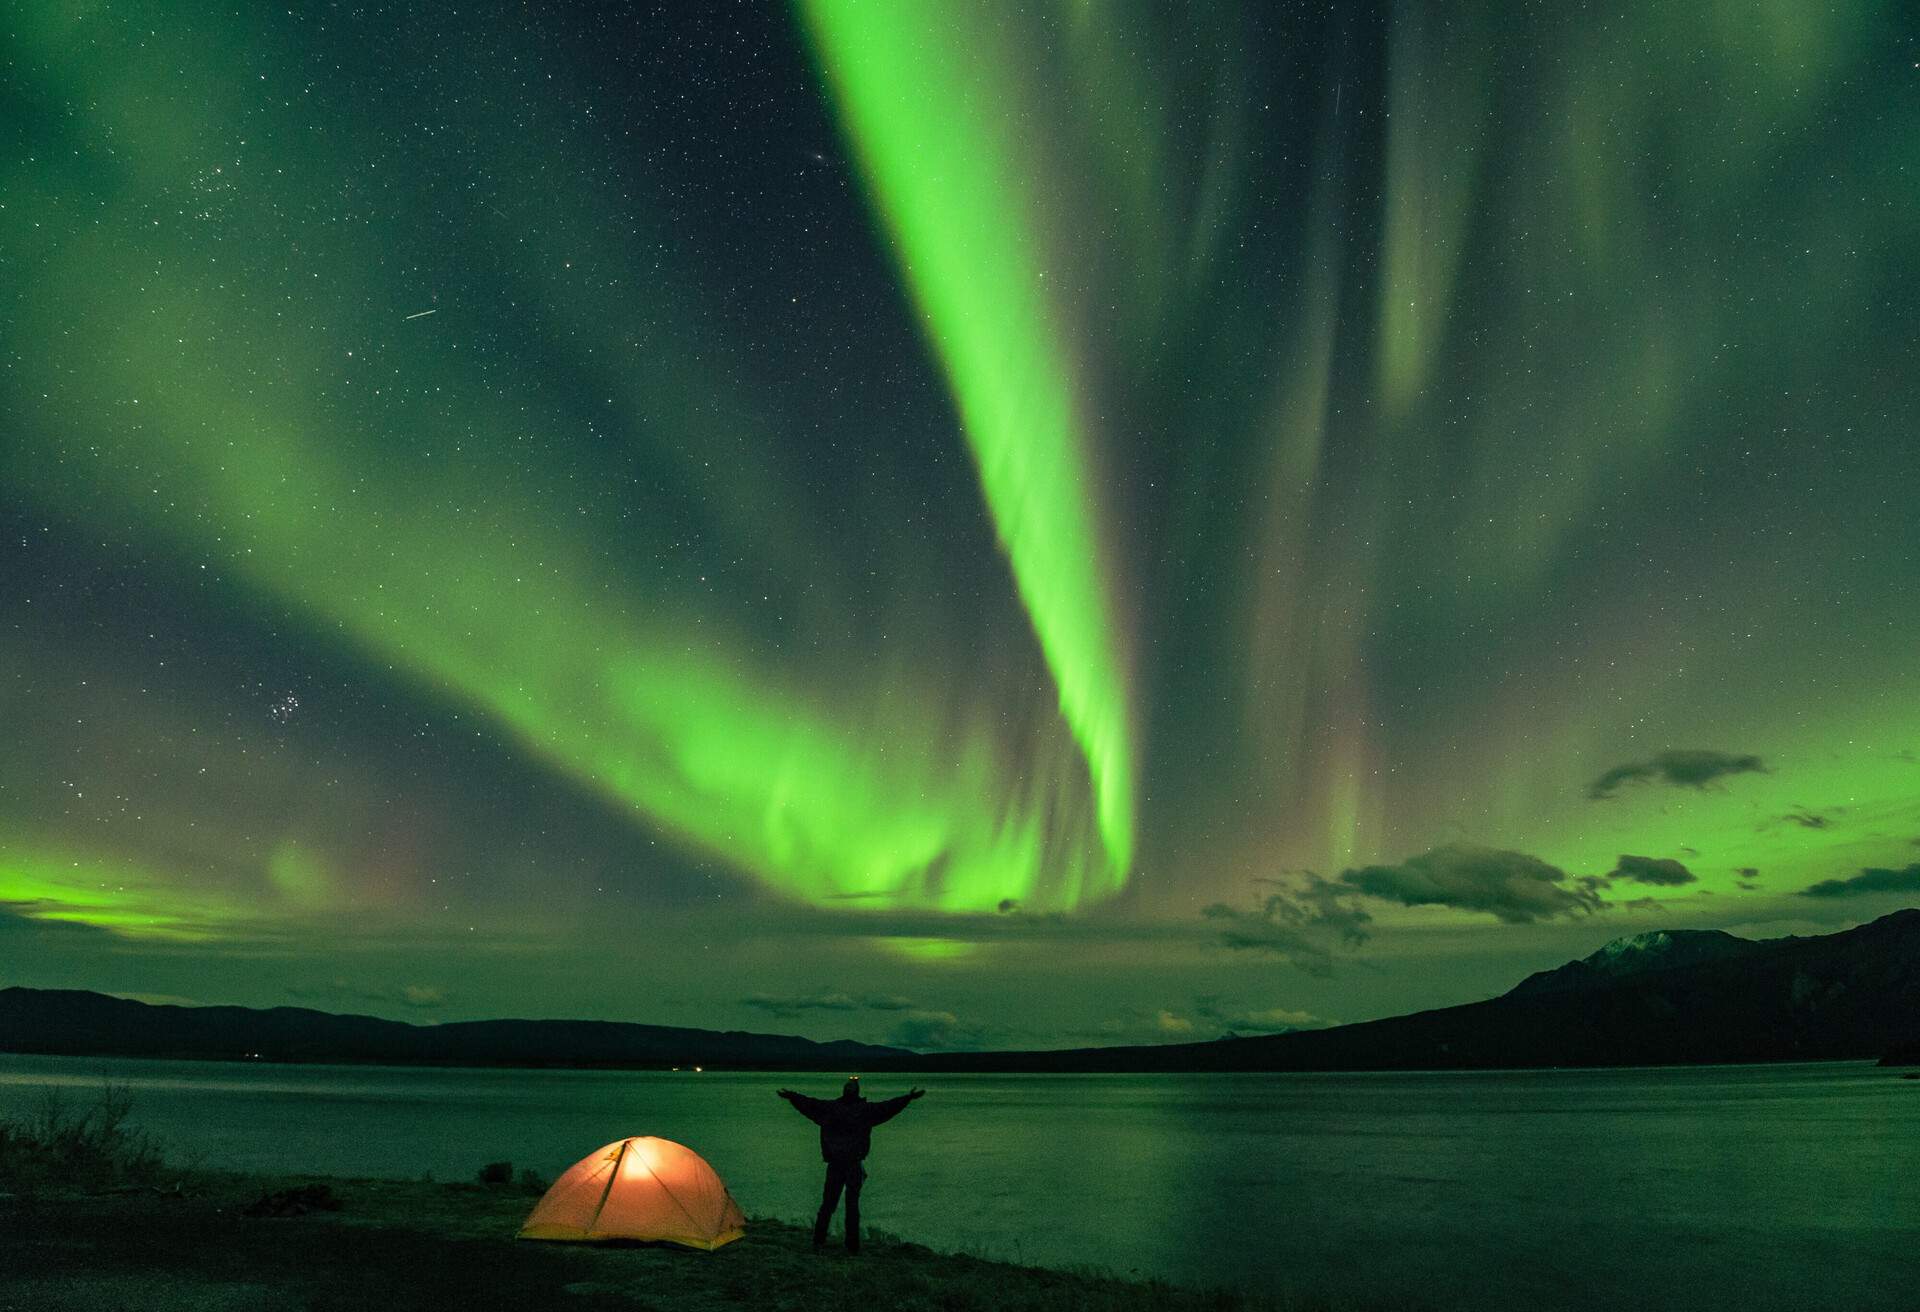 THEME_NATURE_NORTHERN_LIGHTS_AURORA_CANADA_TENT_PEOPLE_GettyImages-887460924